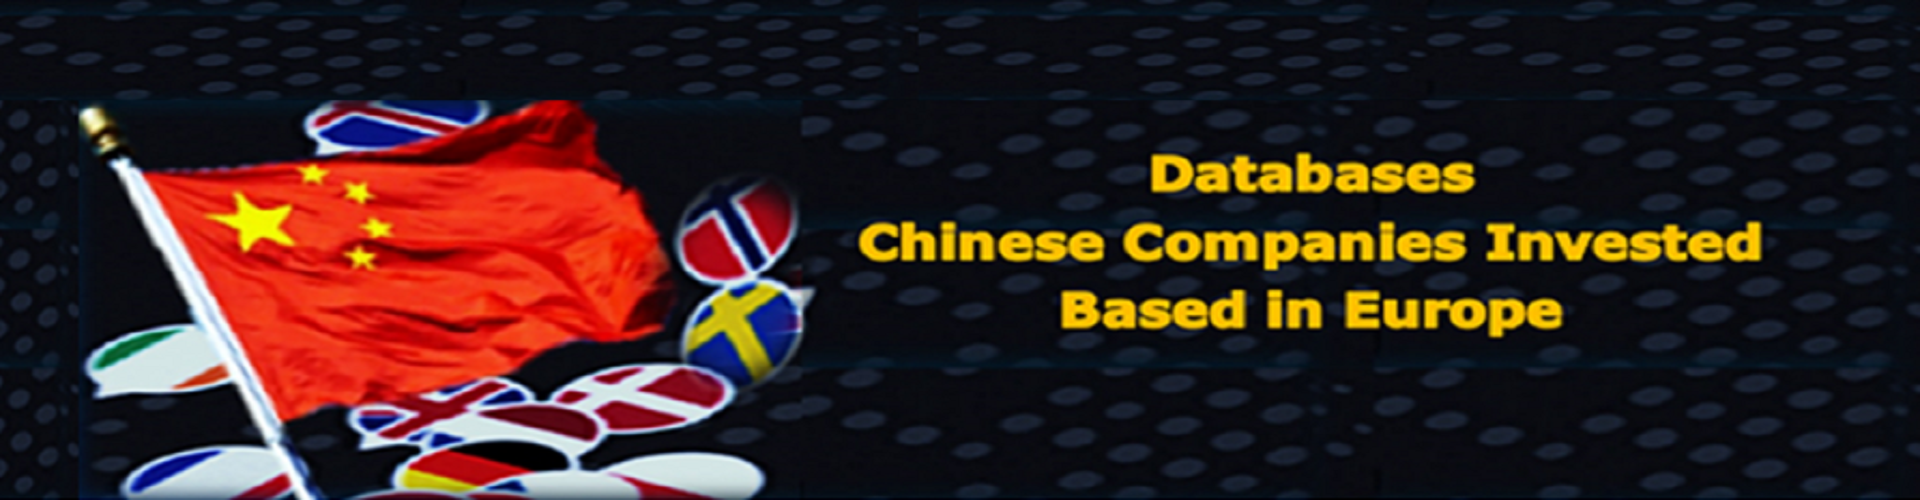 Databases Chinese Companies Invested in Europe-